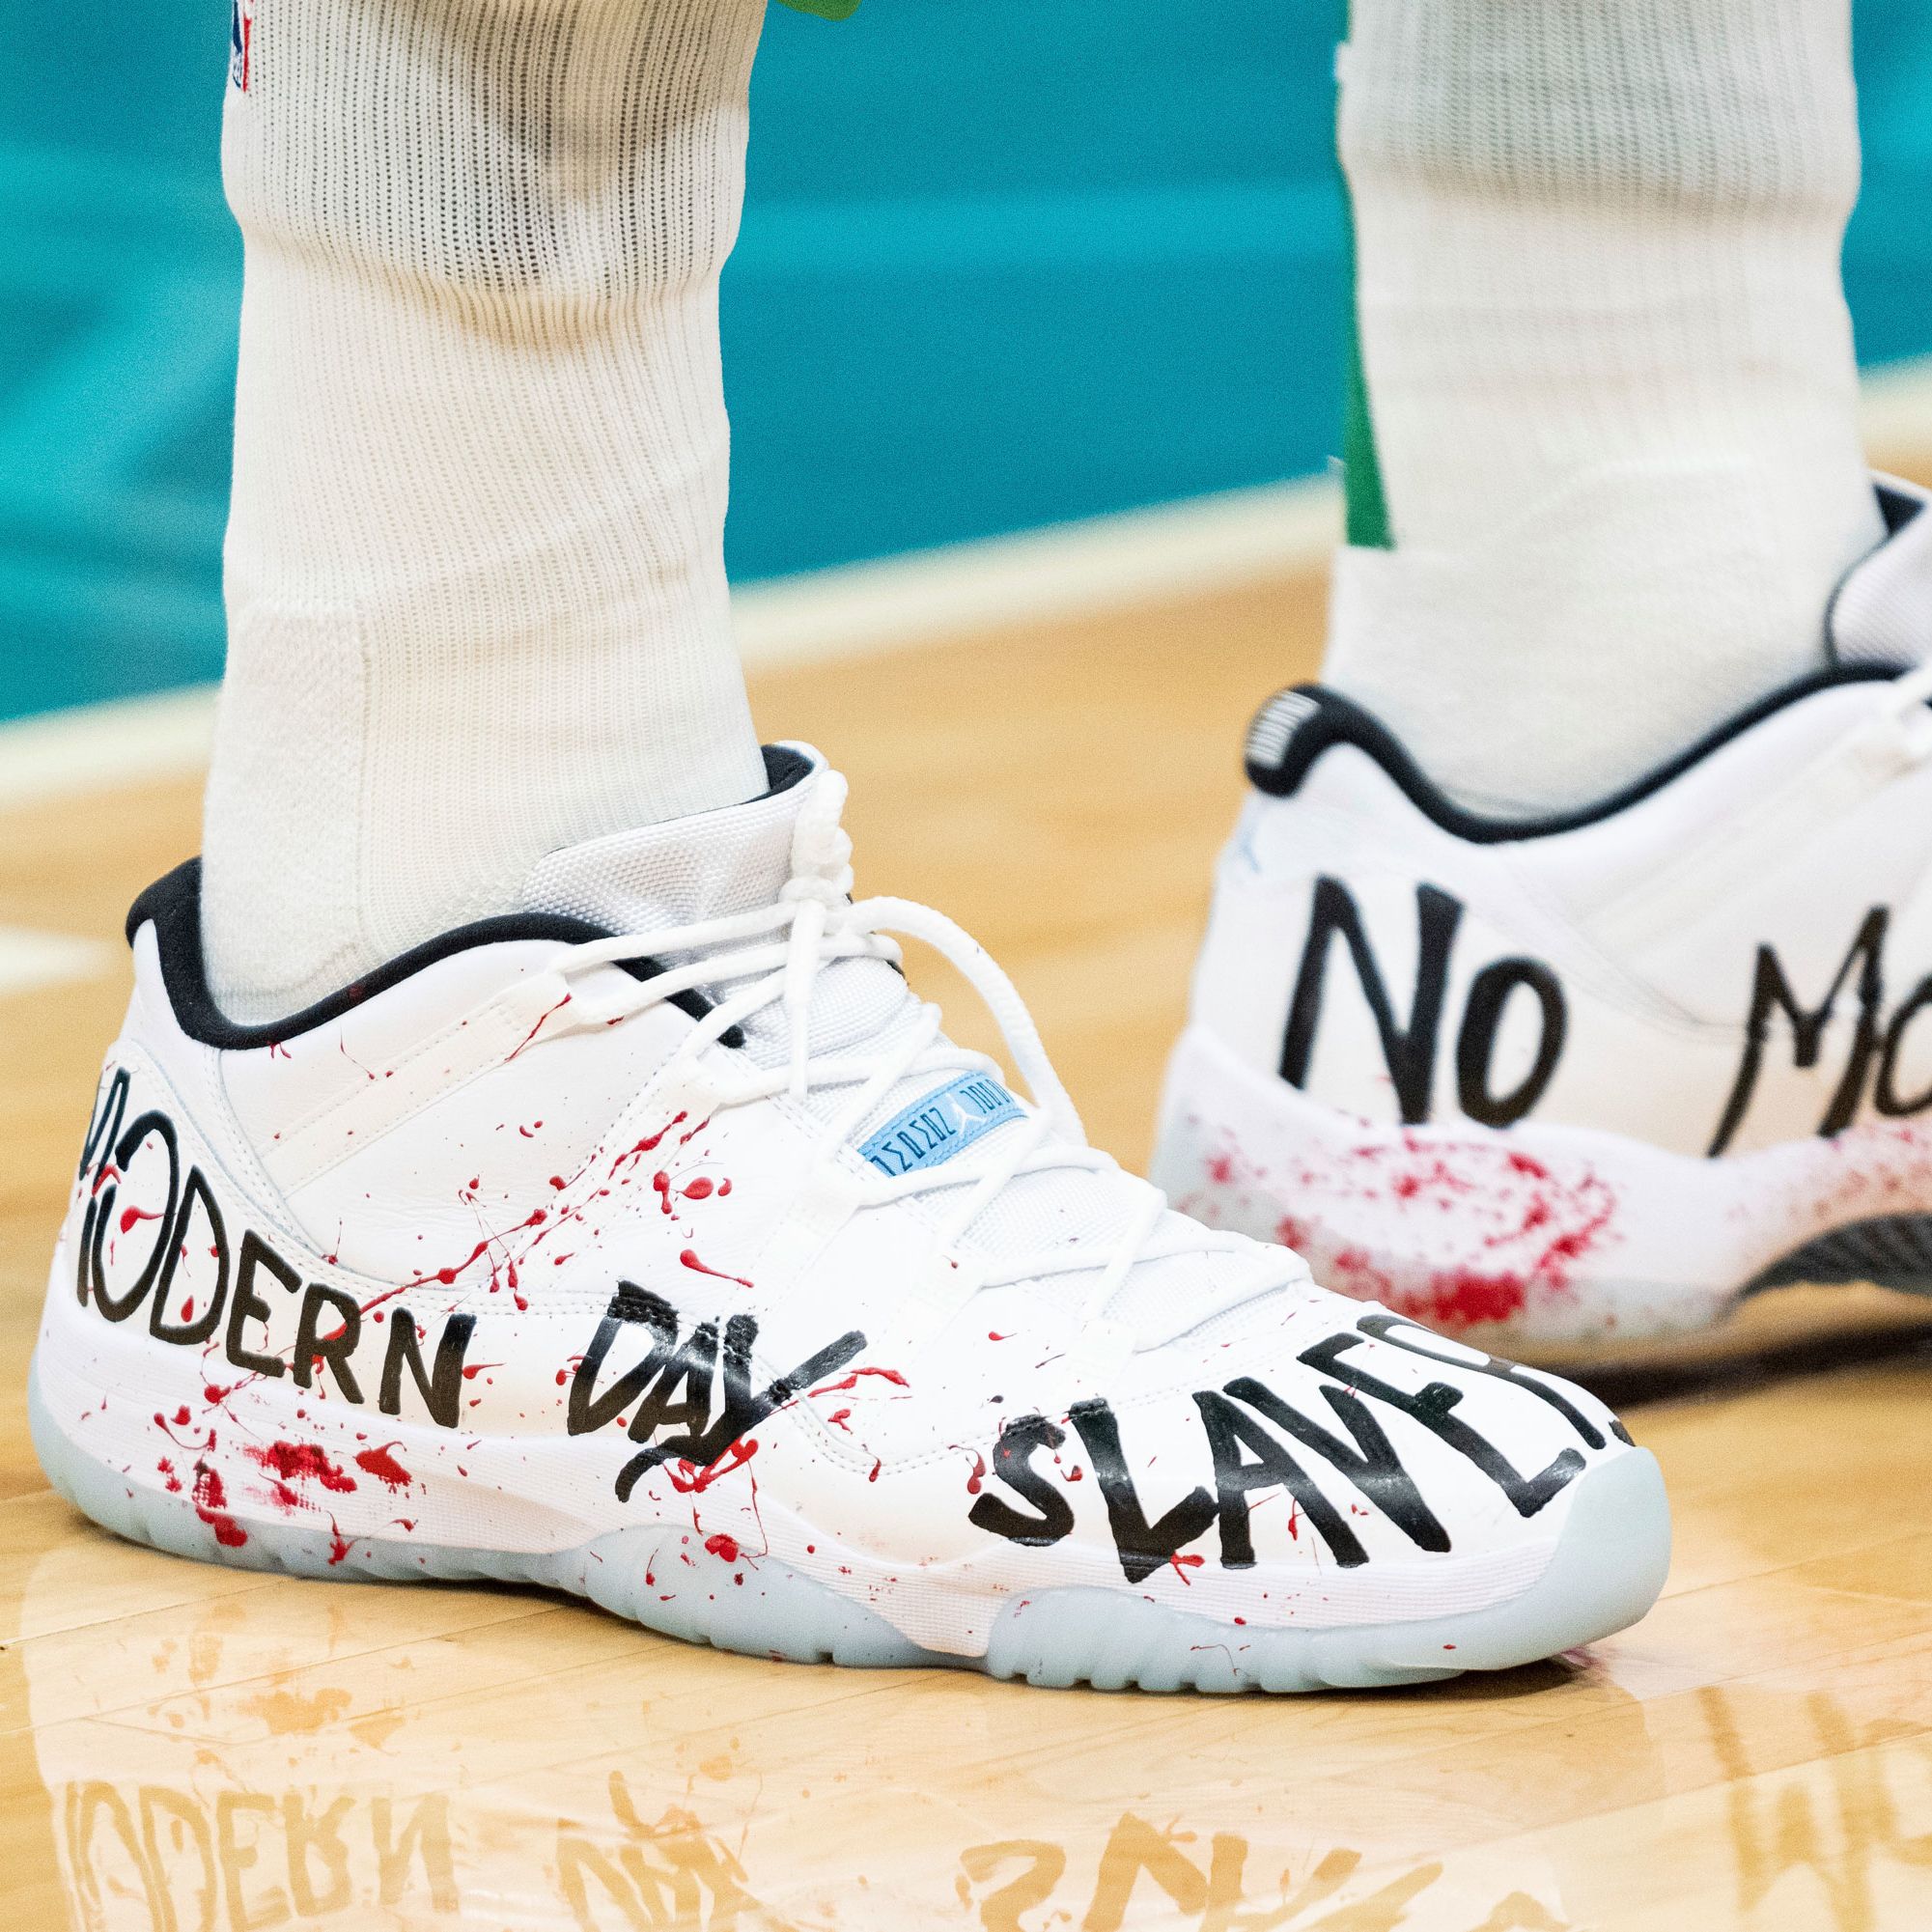 Enes Kanter says Nike is 'scared to speak up' China and wears 'Modern Day Slavery' shoes in protest of Uyghur treatment |